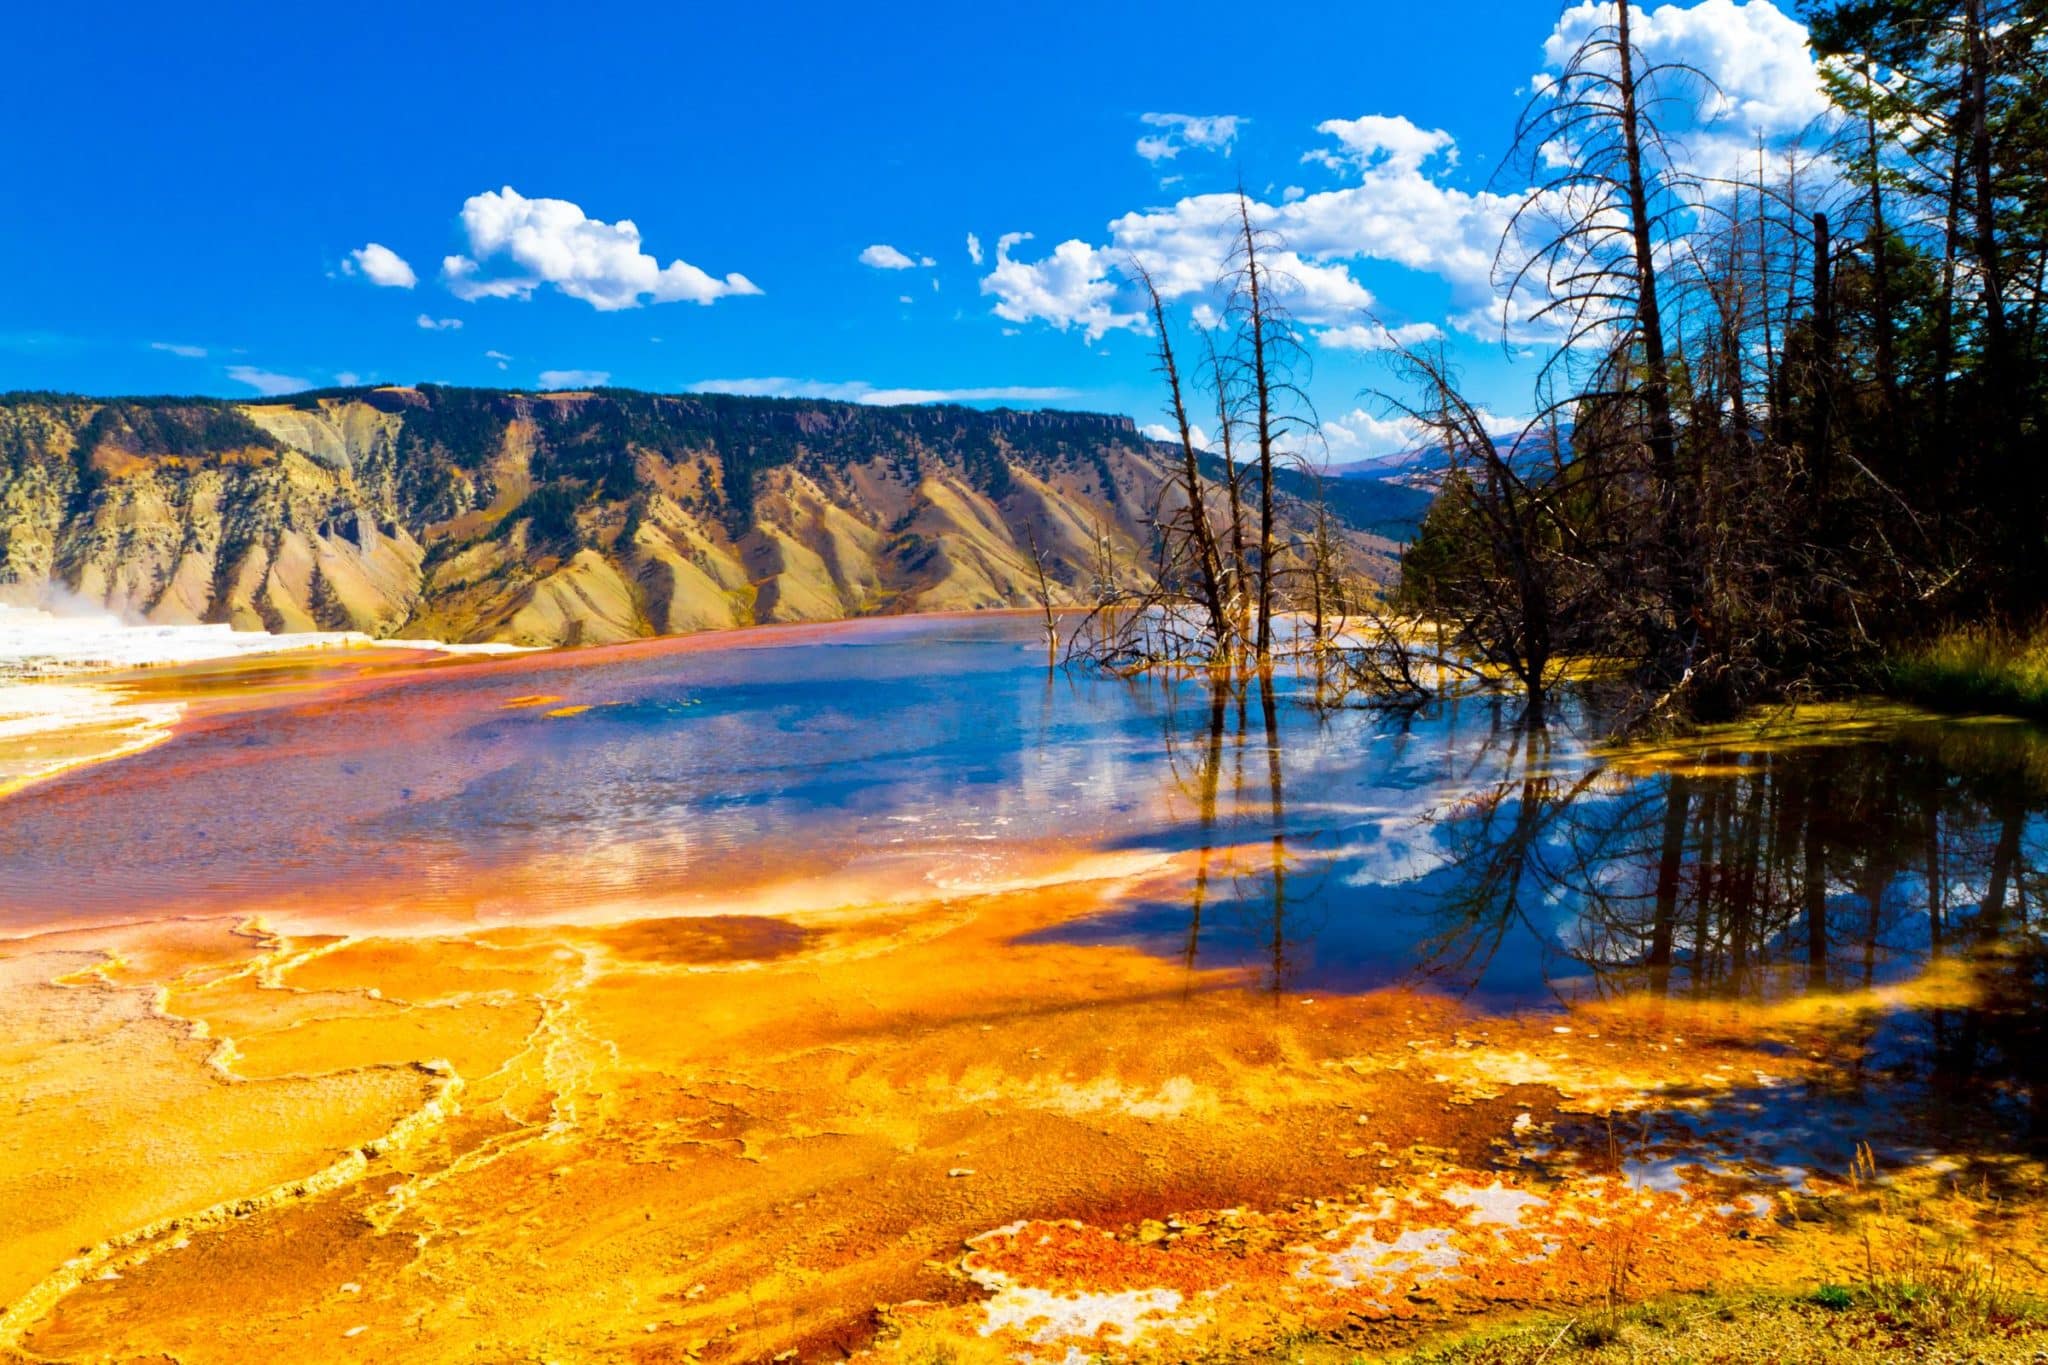 yellowstone-national-park-to-celebrate-150th-anniversary-with-series-of-activities-american